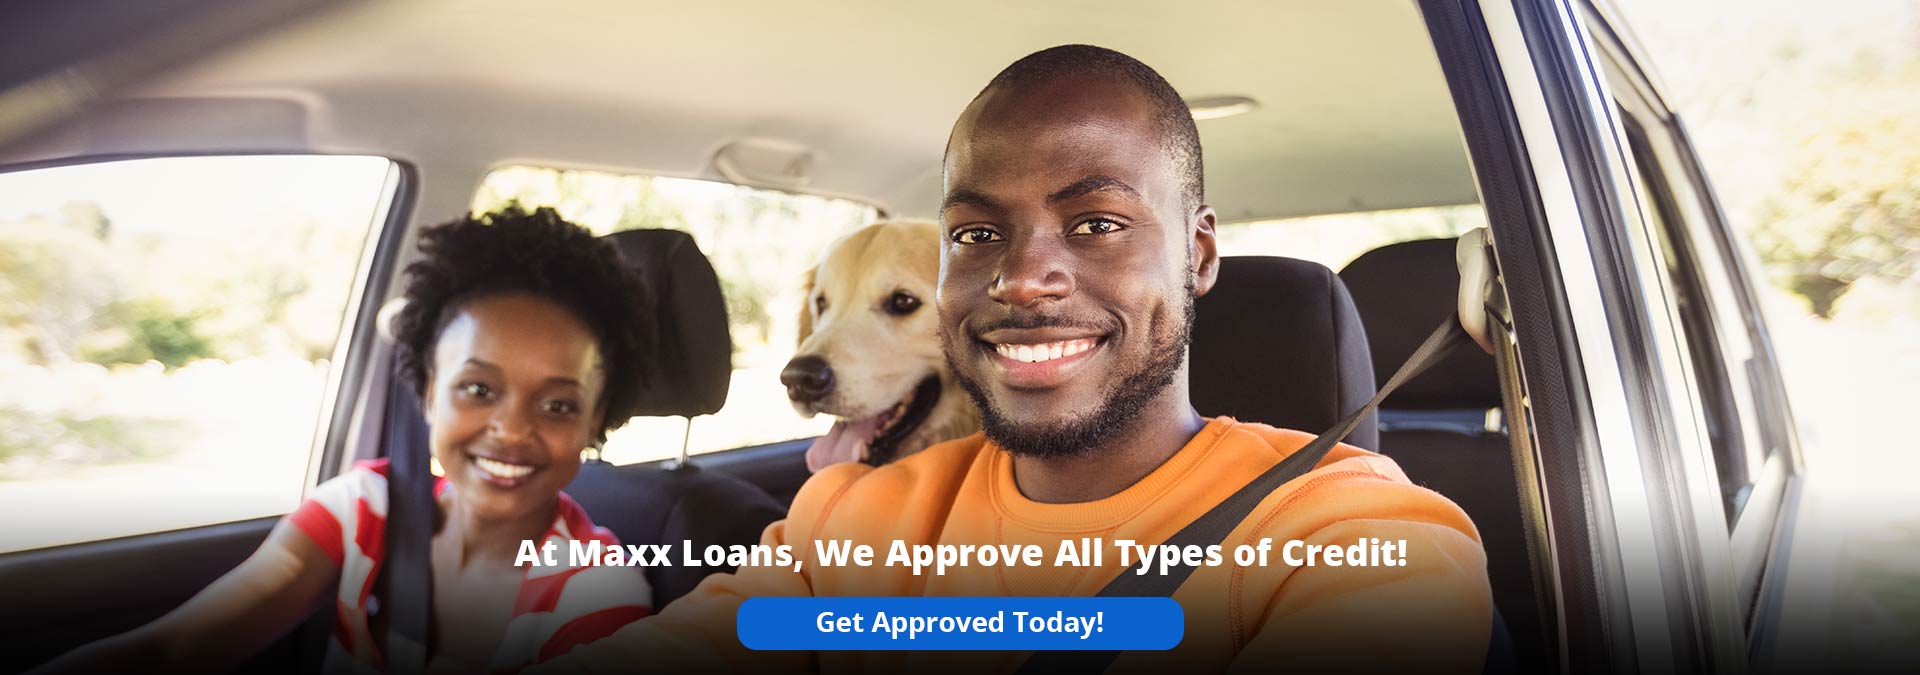 We approve all types of credit